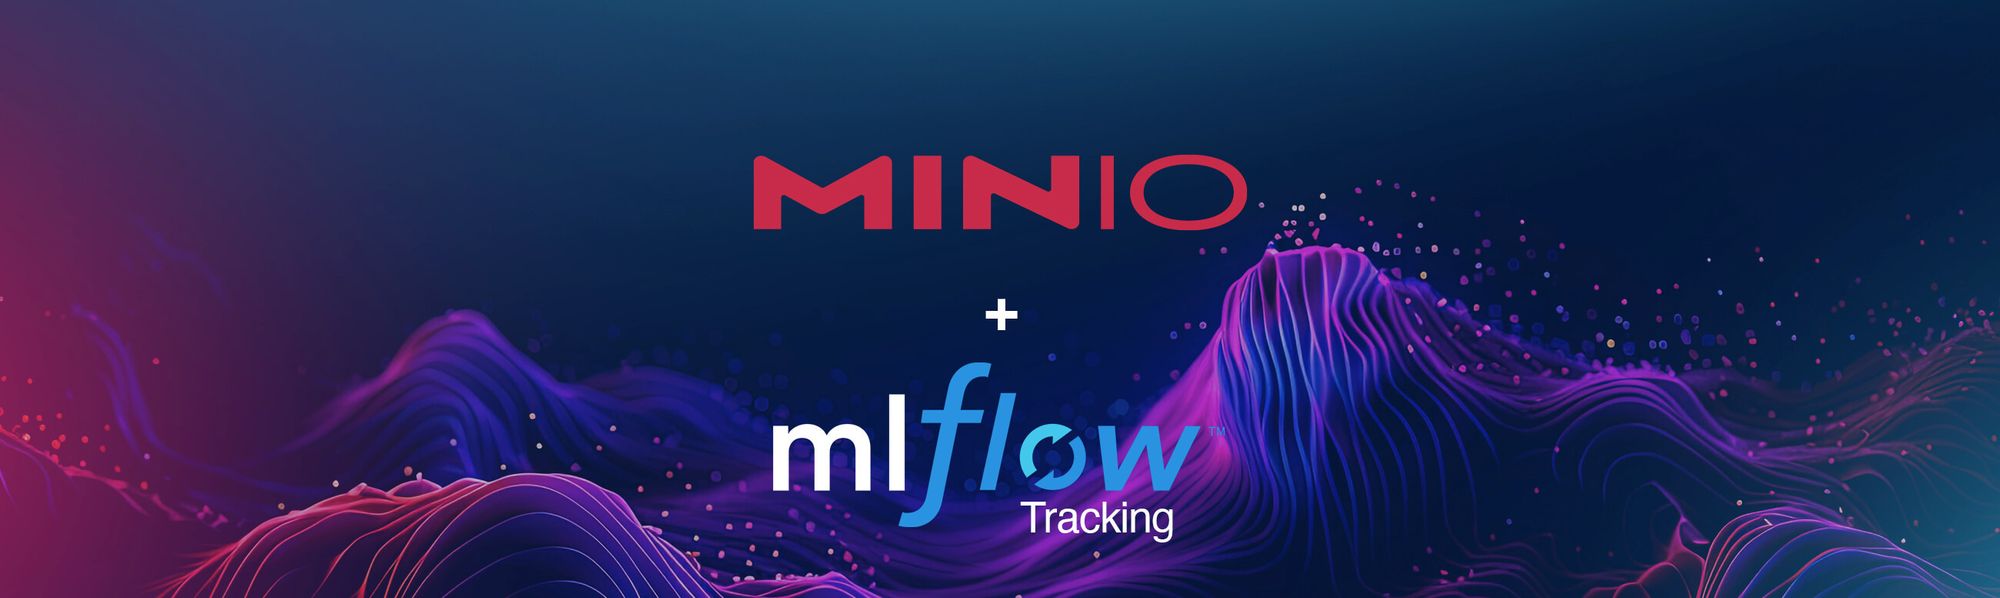 MLflow Tracking and MinIO